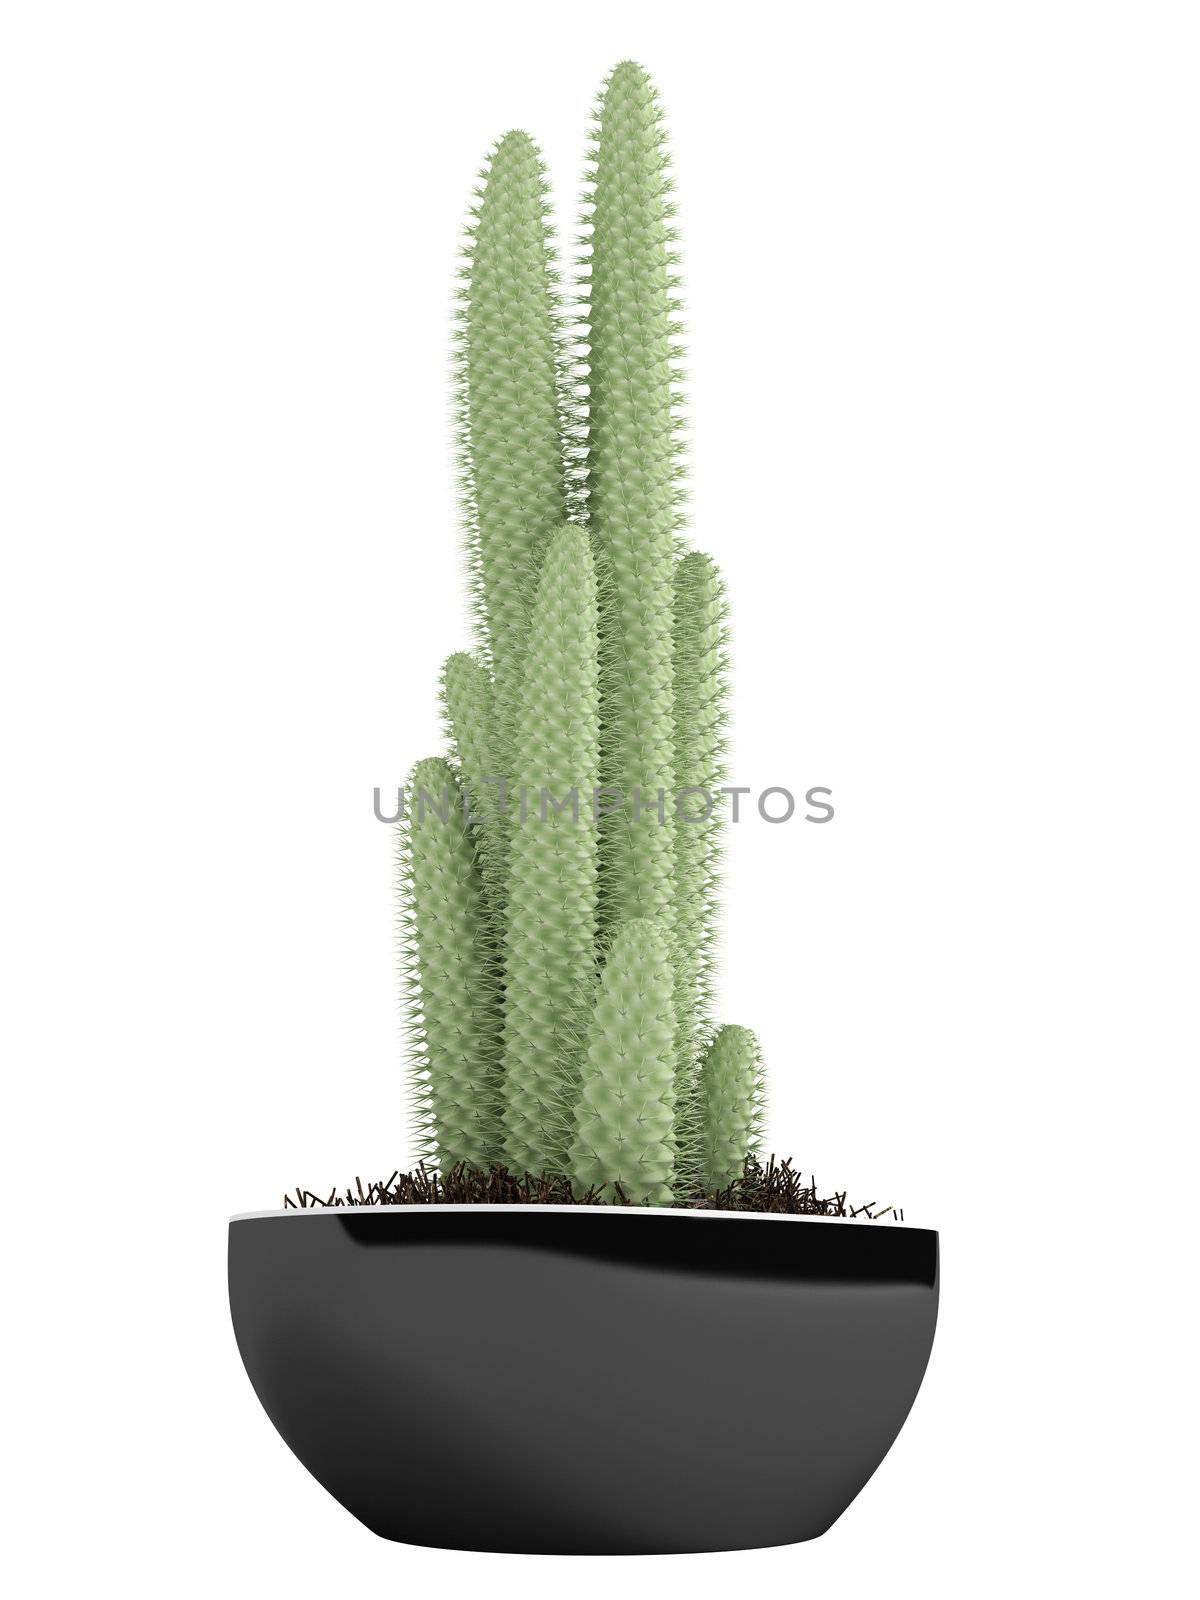 Cactus in a pot isolated on white background